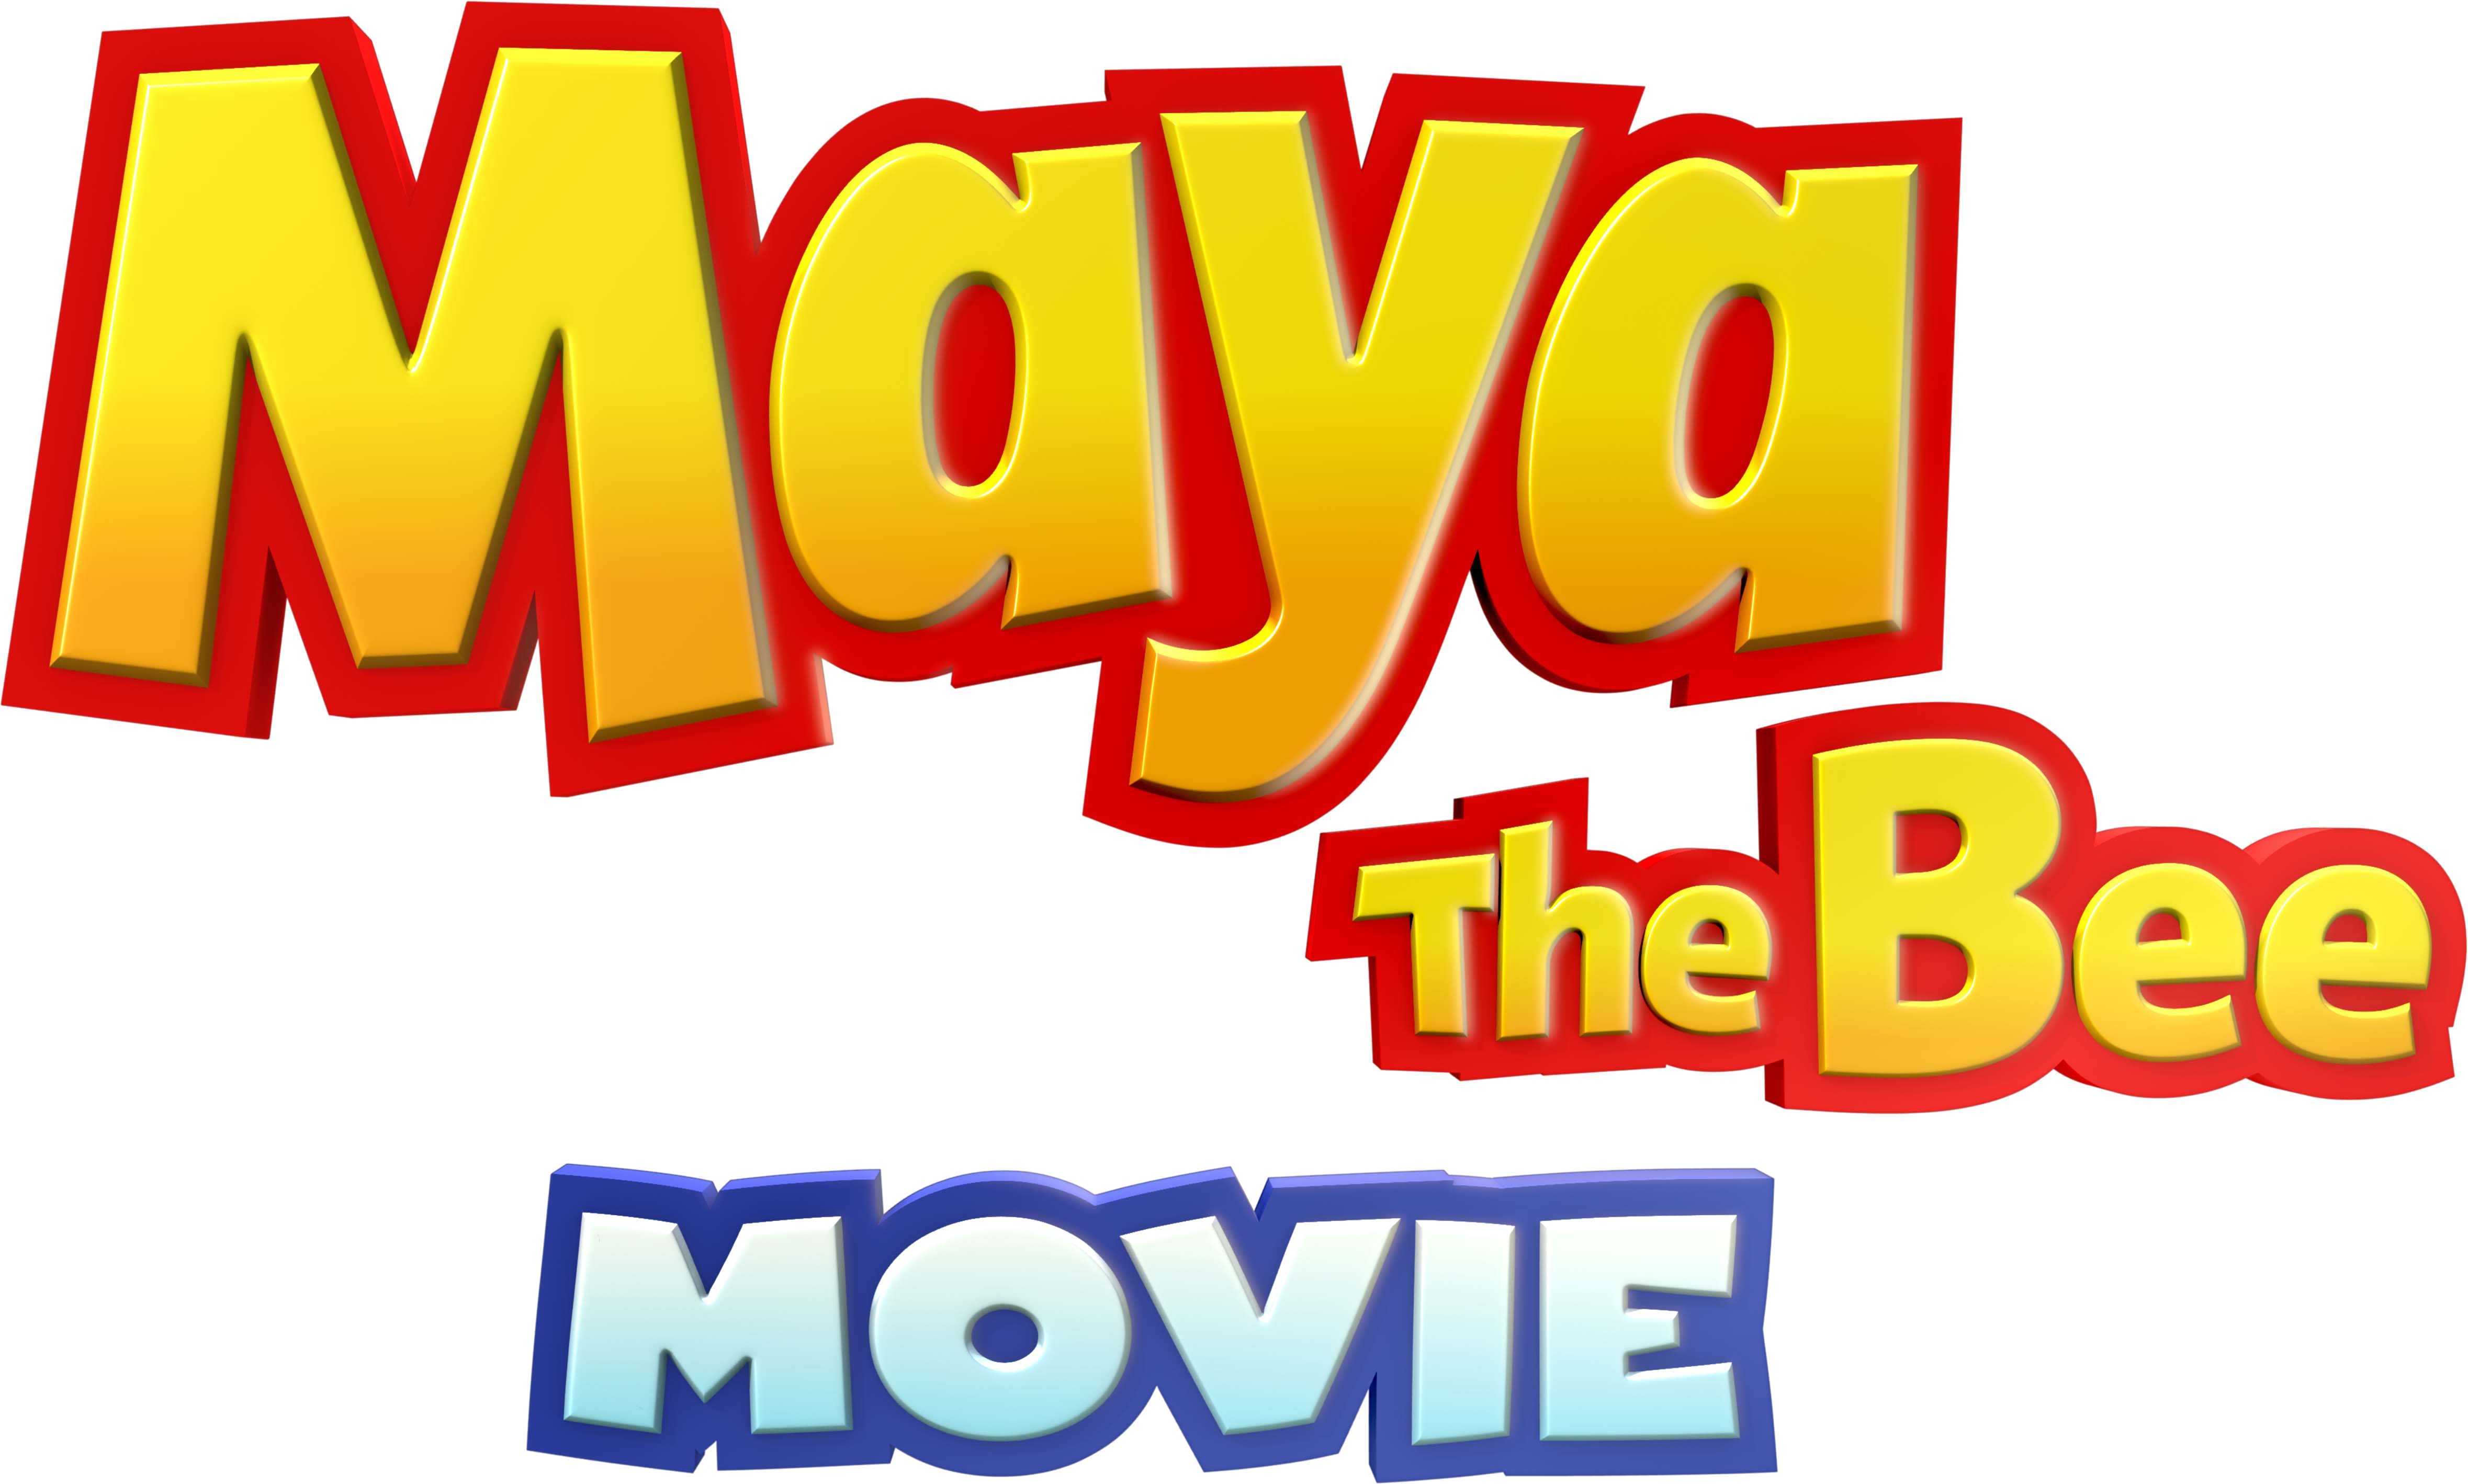 Maya The Bee Movie Backgrounds, Compatible - PC, Mobile, Gadgets| 4717x2837 px